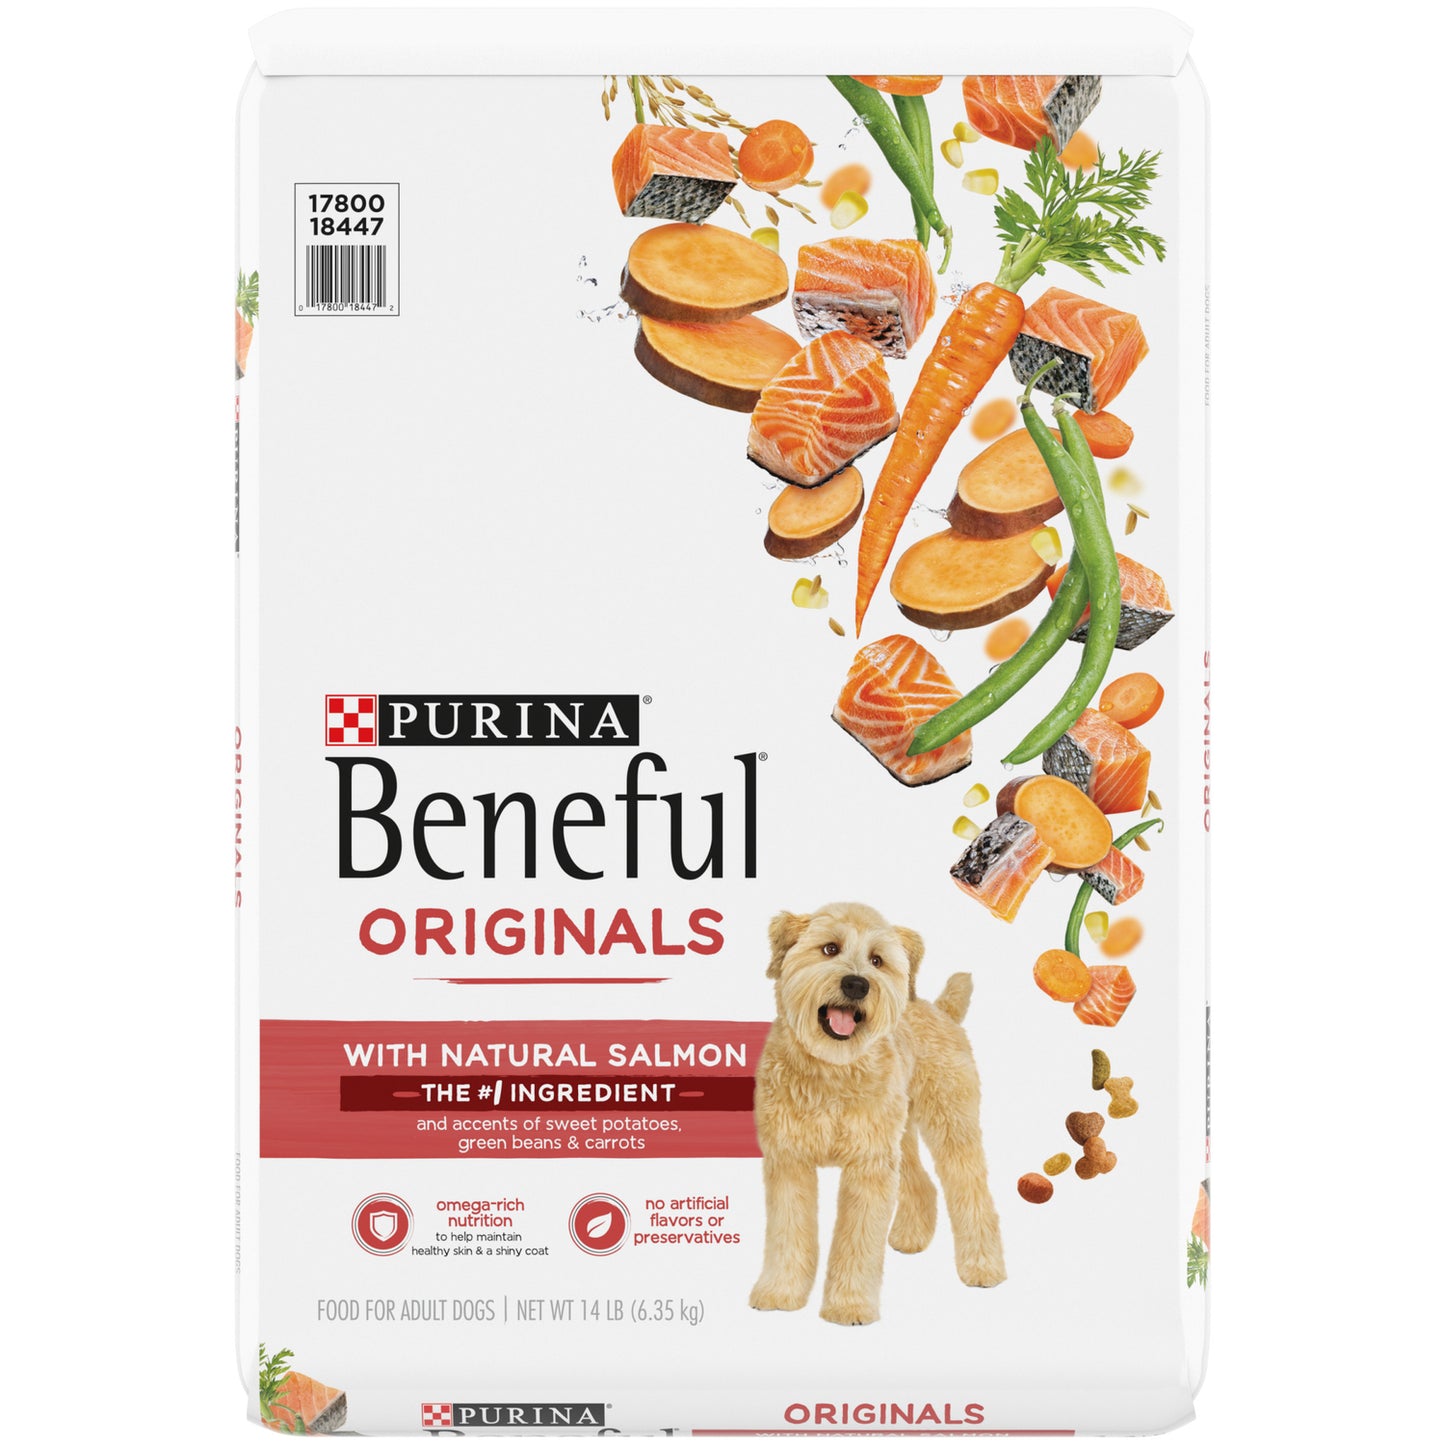 Purina Beneful Originals with Natural Salmon, Skin and Coat Support Dry Dog Food, 14 Lb. Bag